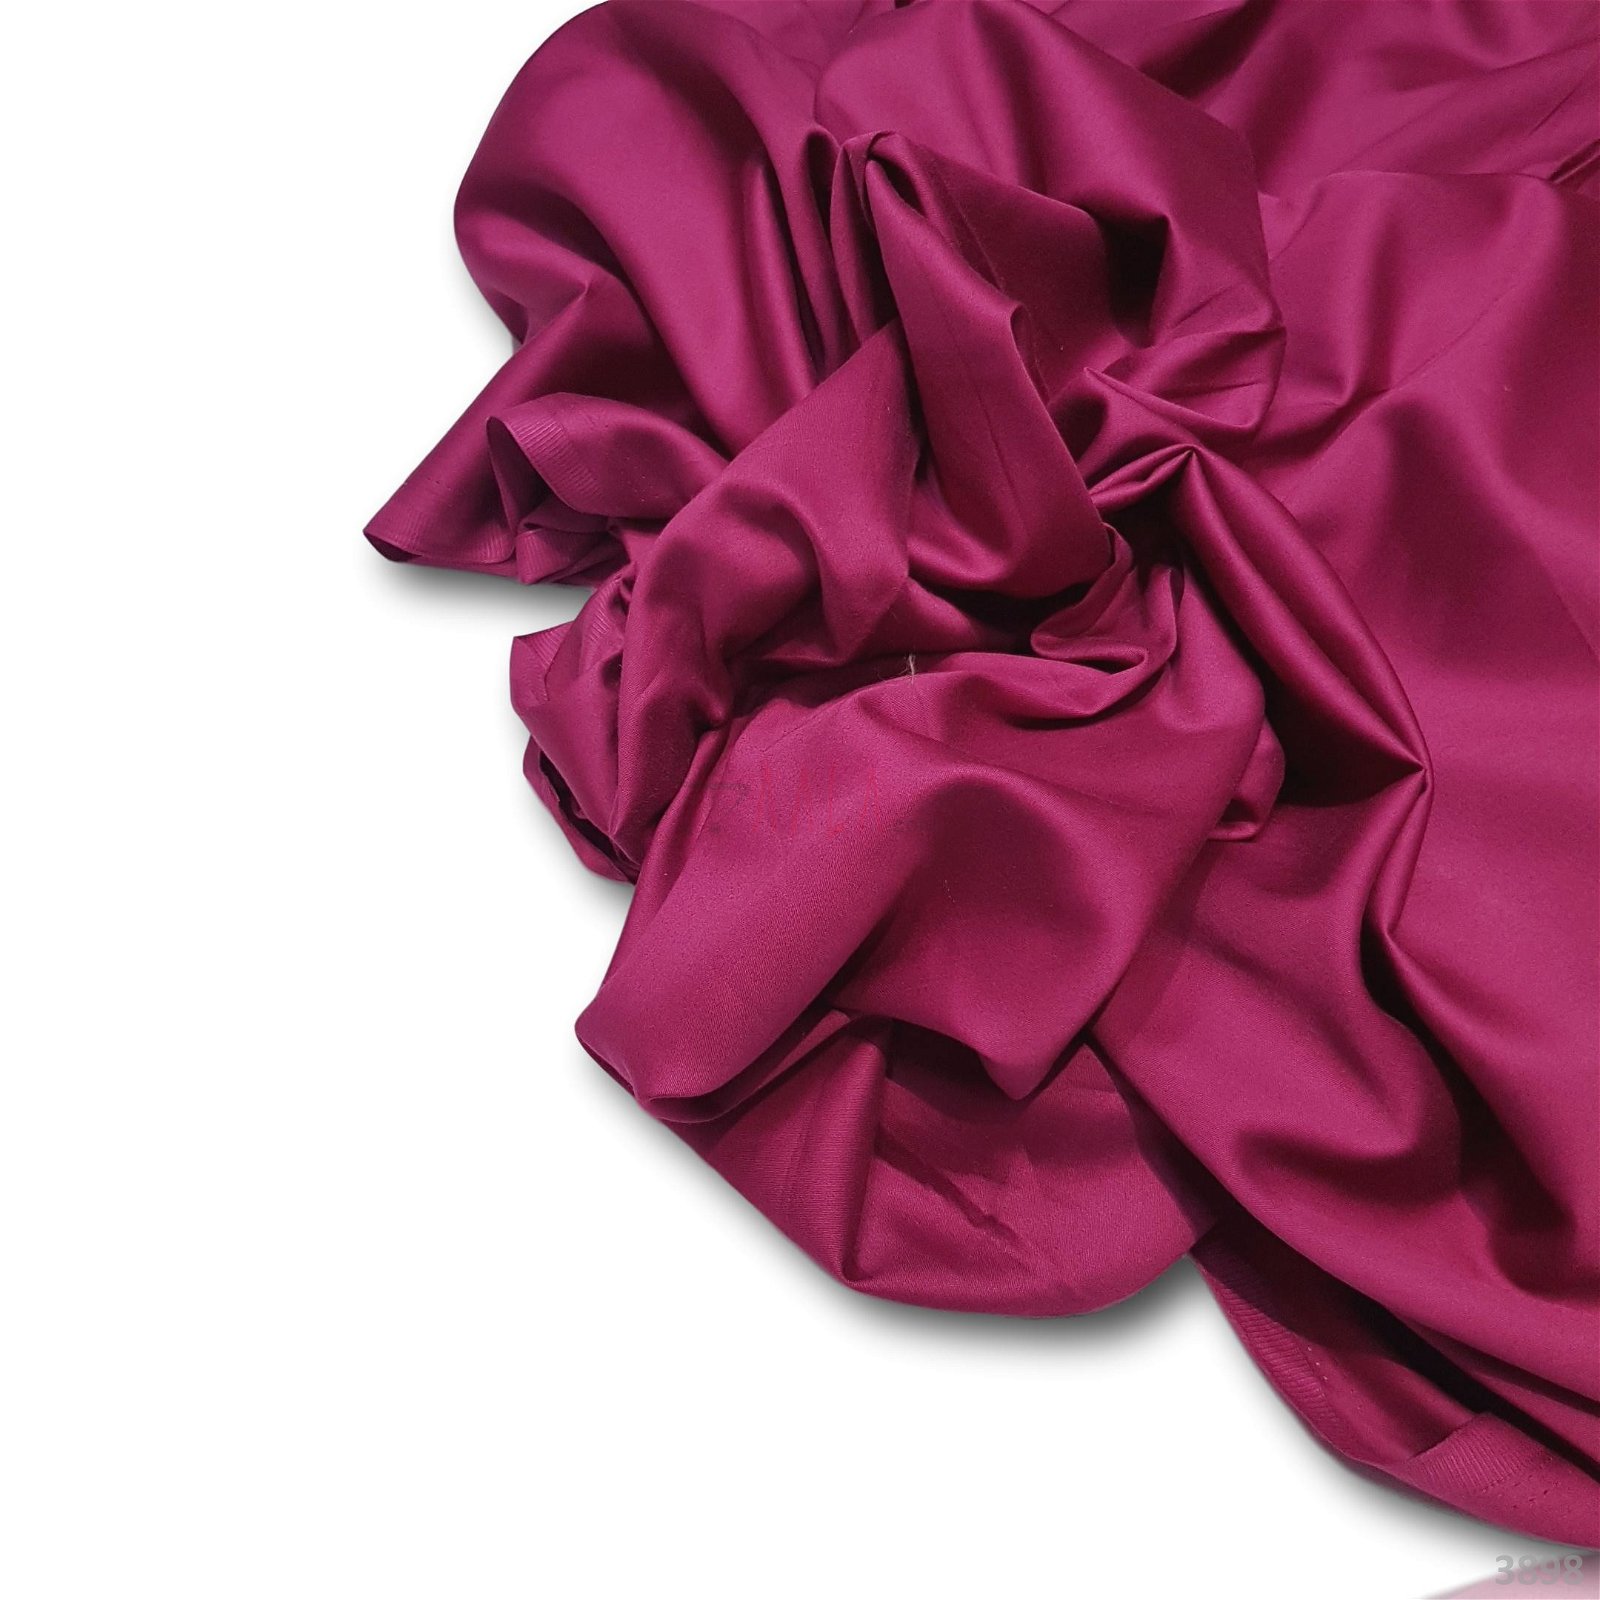 Satin Cotton 44 Inches Dyed Per Metre #3898